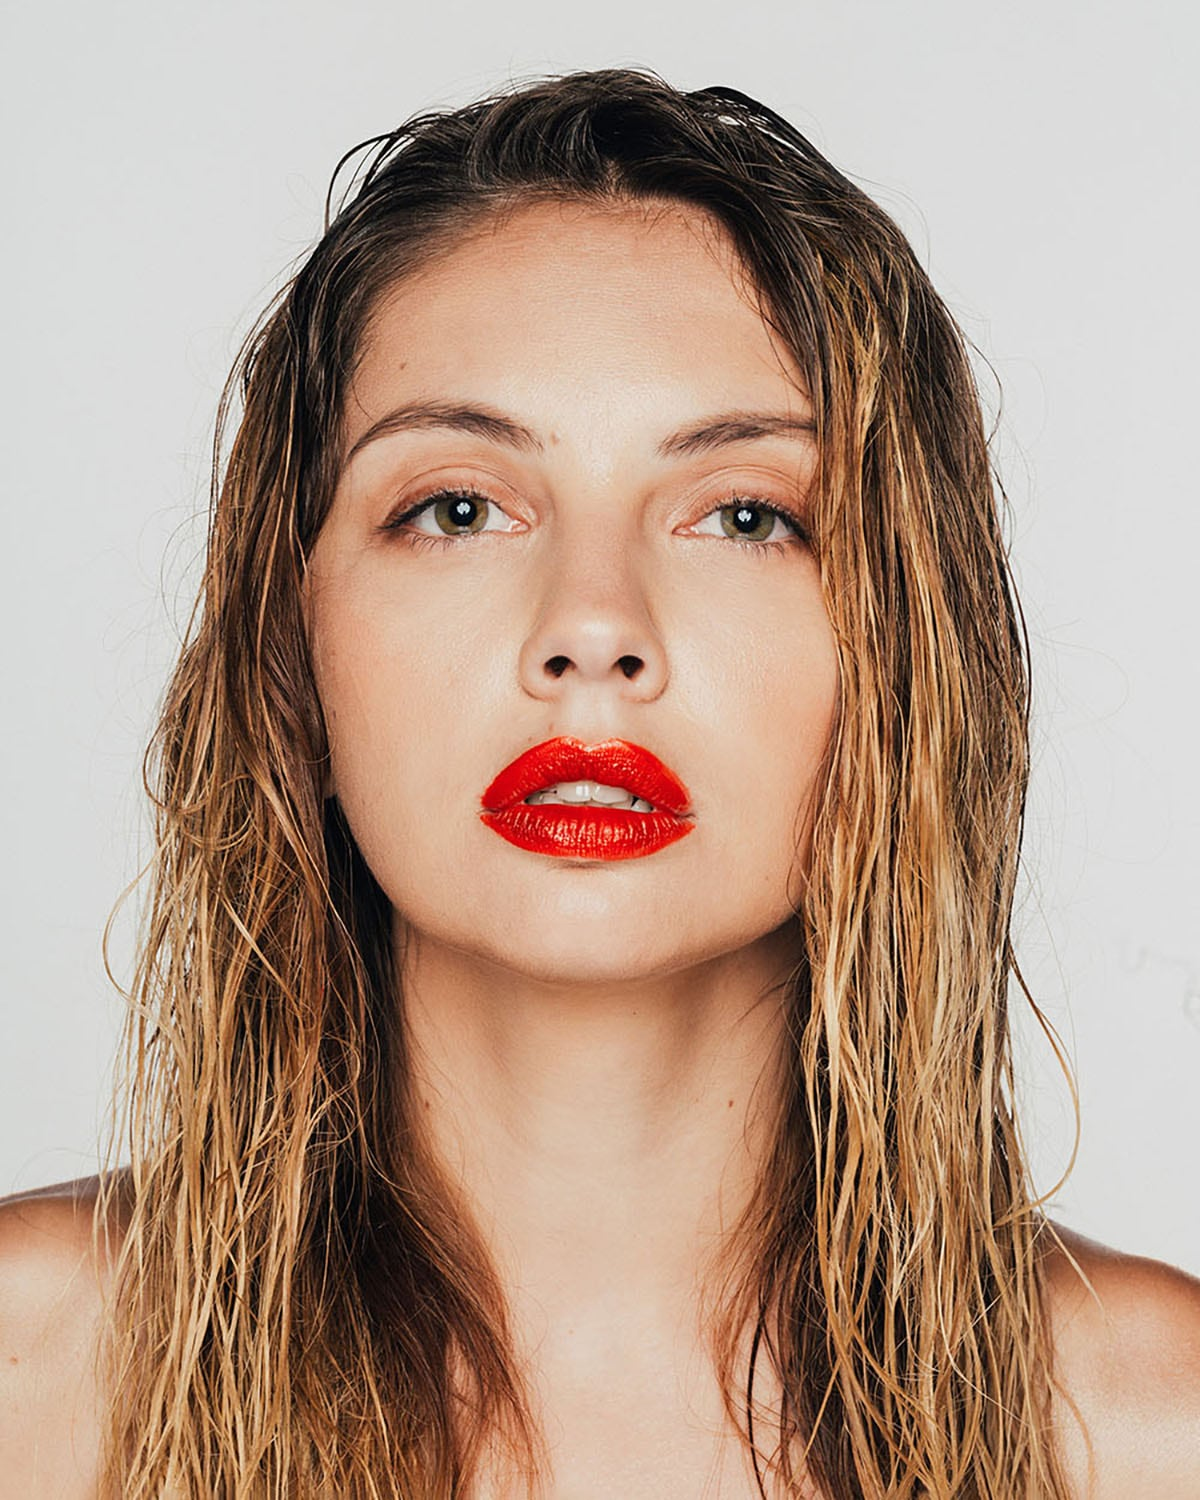 Striking portrait photography of gorgeous female model Inna Khimich with bright red lipstick detail shot in studio by London portrait photographer Ira Giorgetti